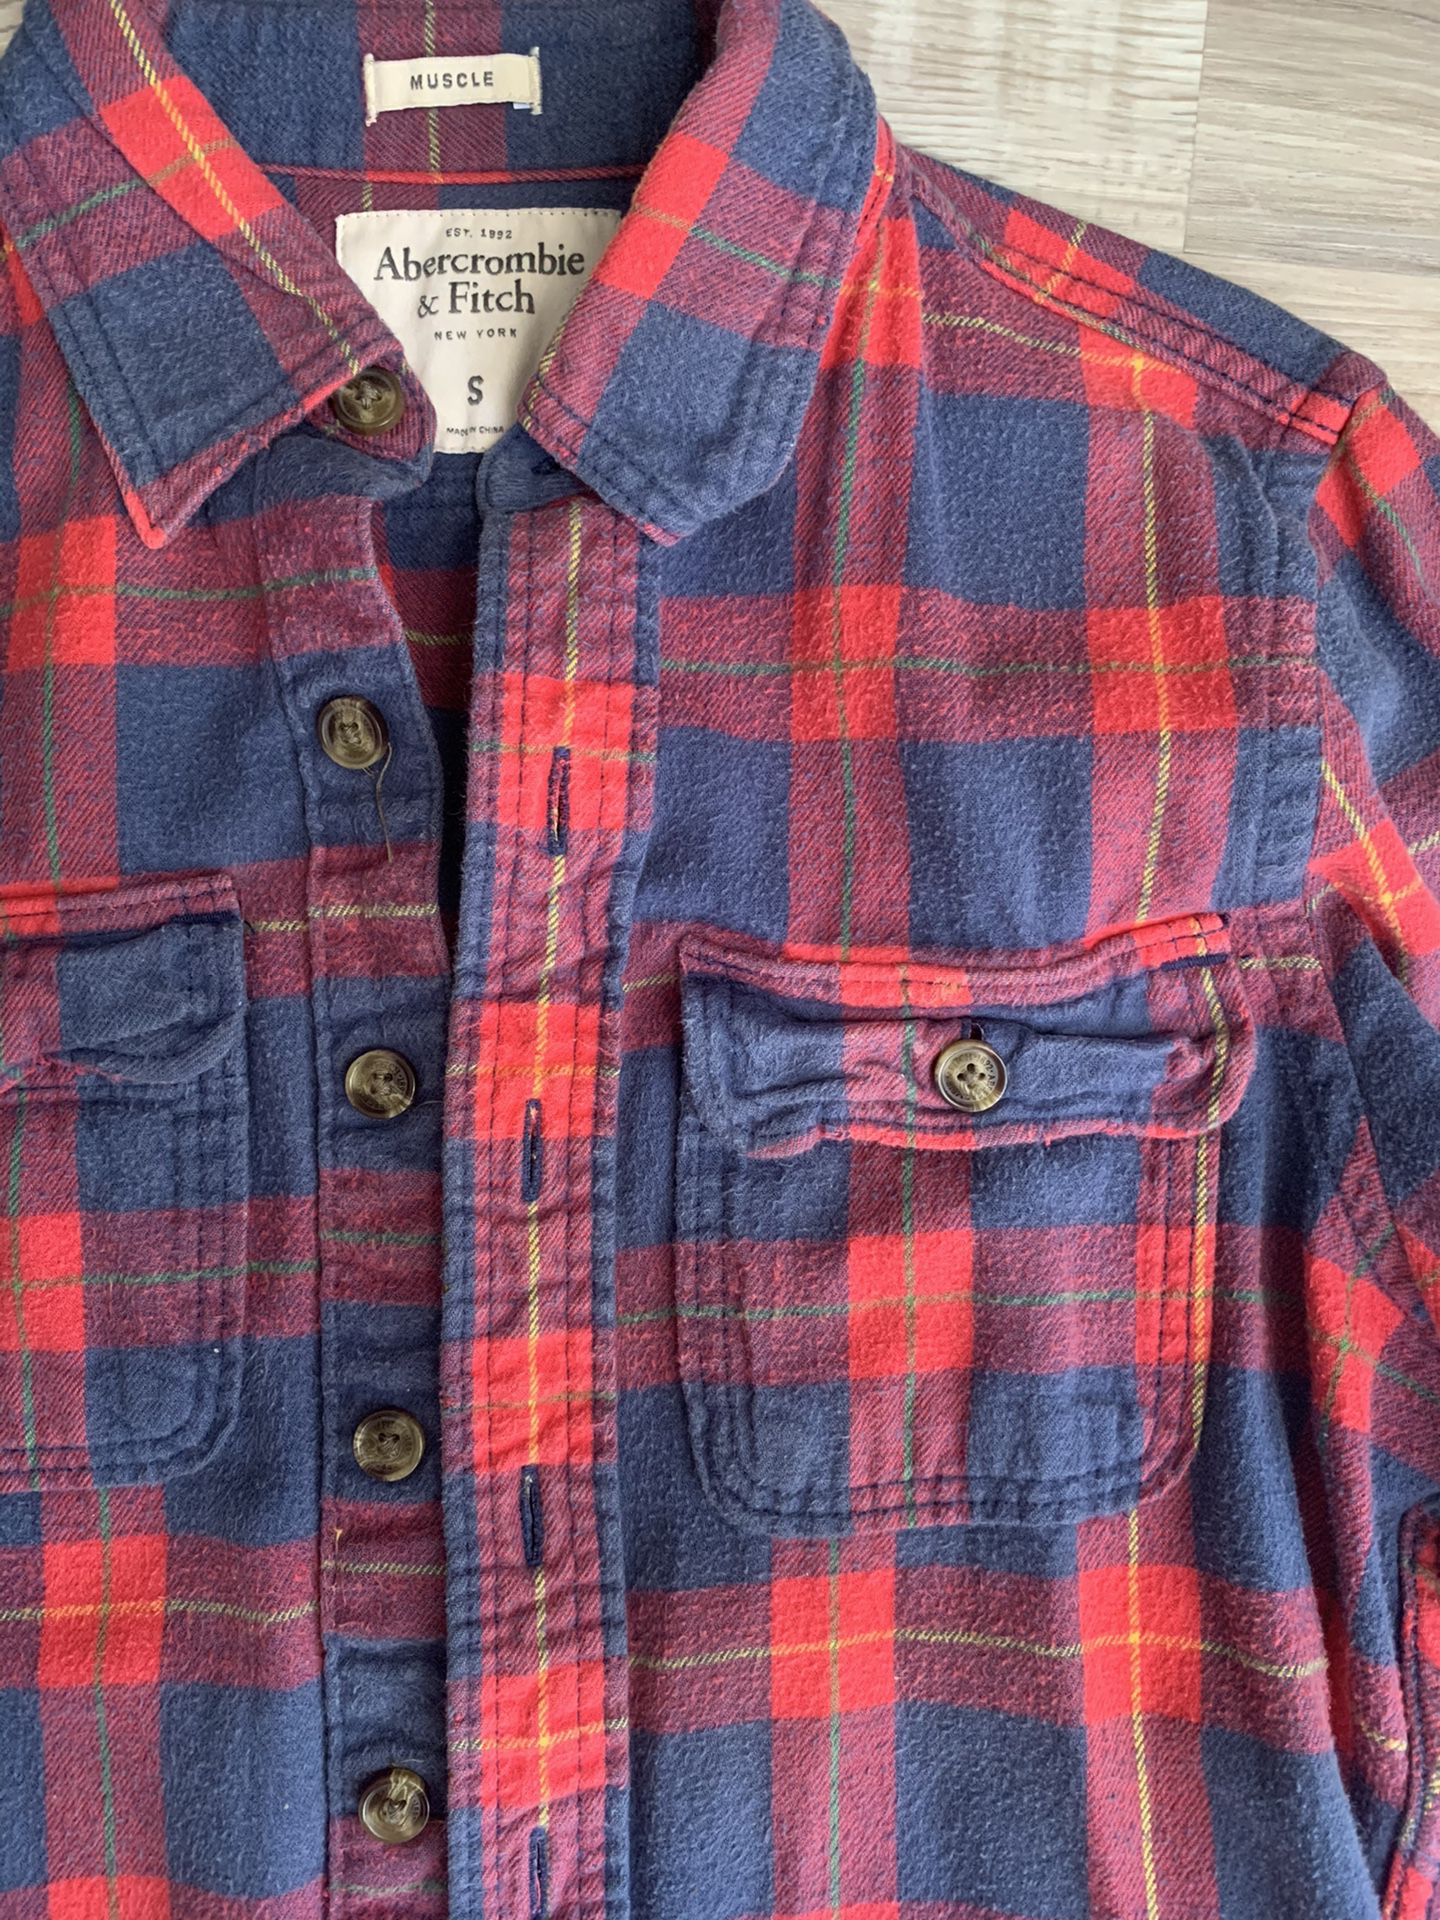 Abercrombie & Fitch Flannel!